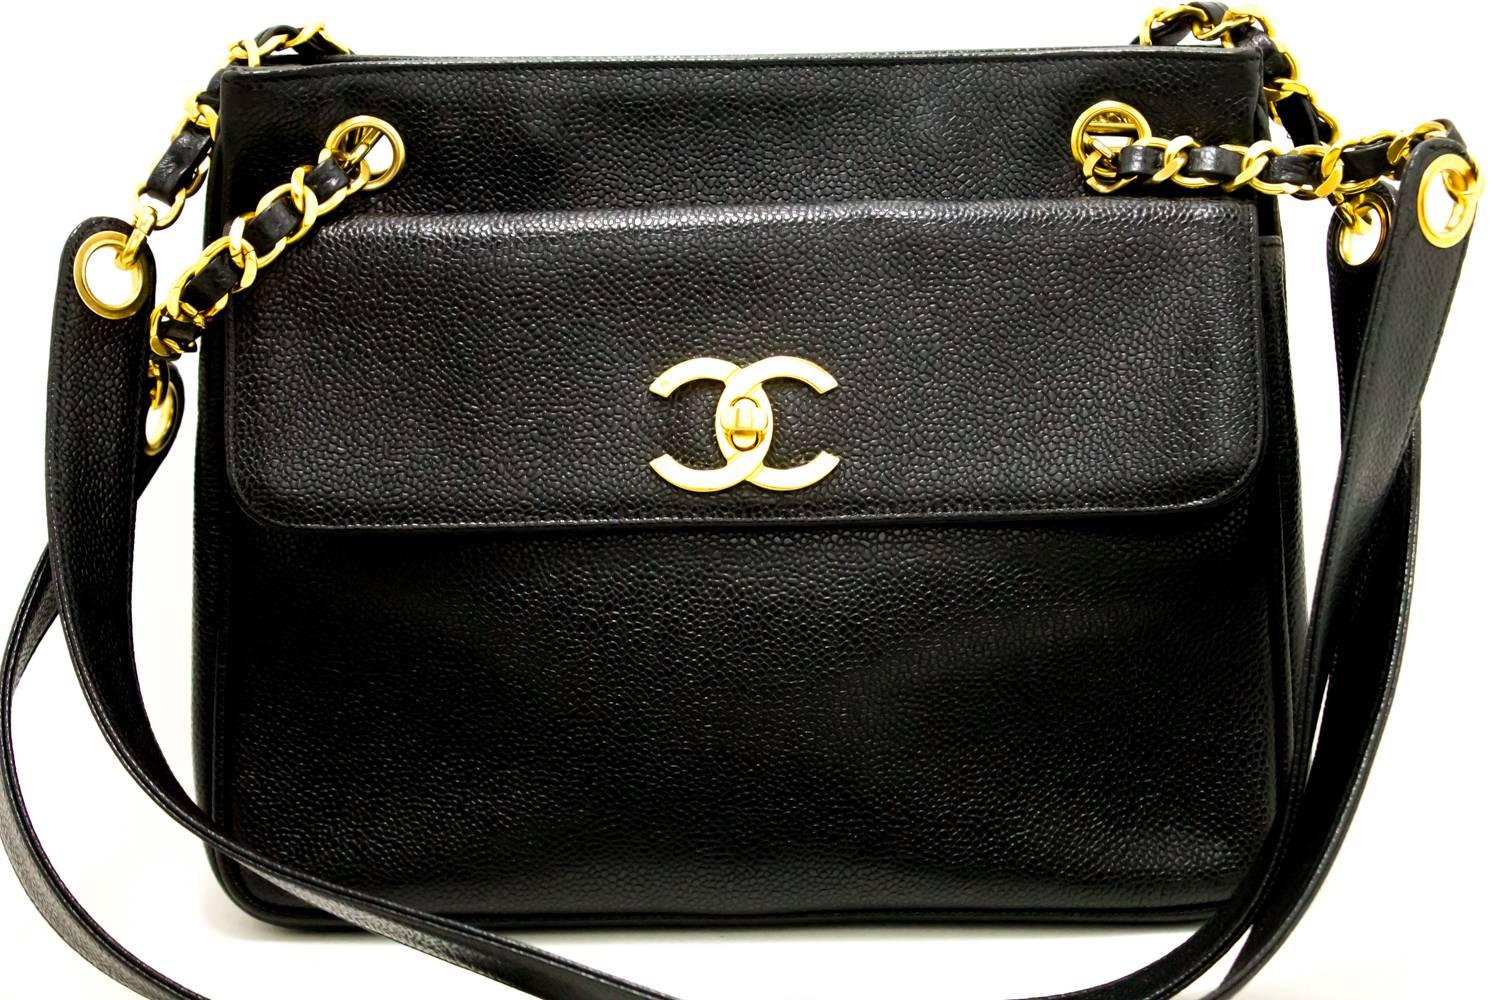 An authentic CHANEL Caviar Chain Shoulder Bag Black Leather Gold Hw CC Pocket The outside material is Caviar leather.
Conditions & Ratings
Outside material: Caviar leather
Color: Black
Closure: Snap
Hardware and chain: Gold-tone
Made in Italy
Serial